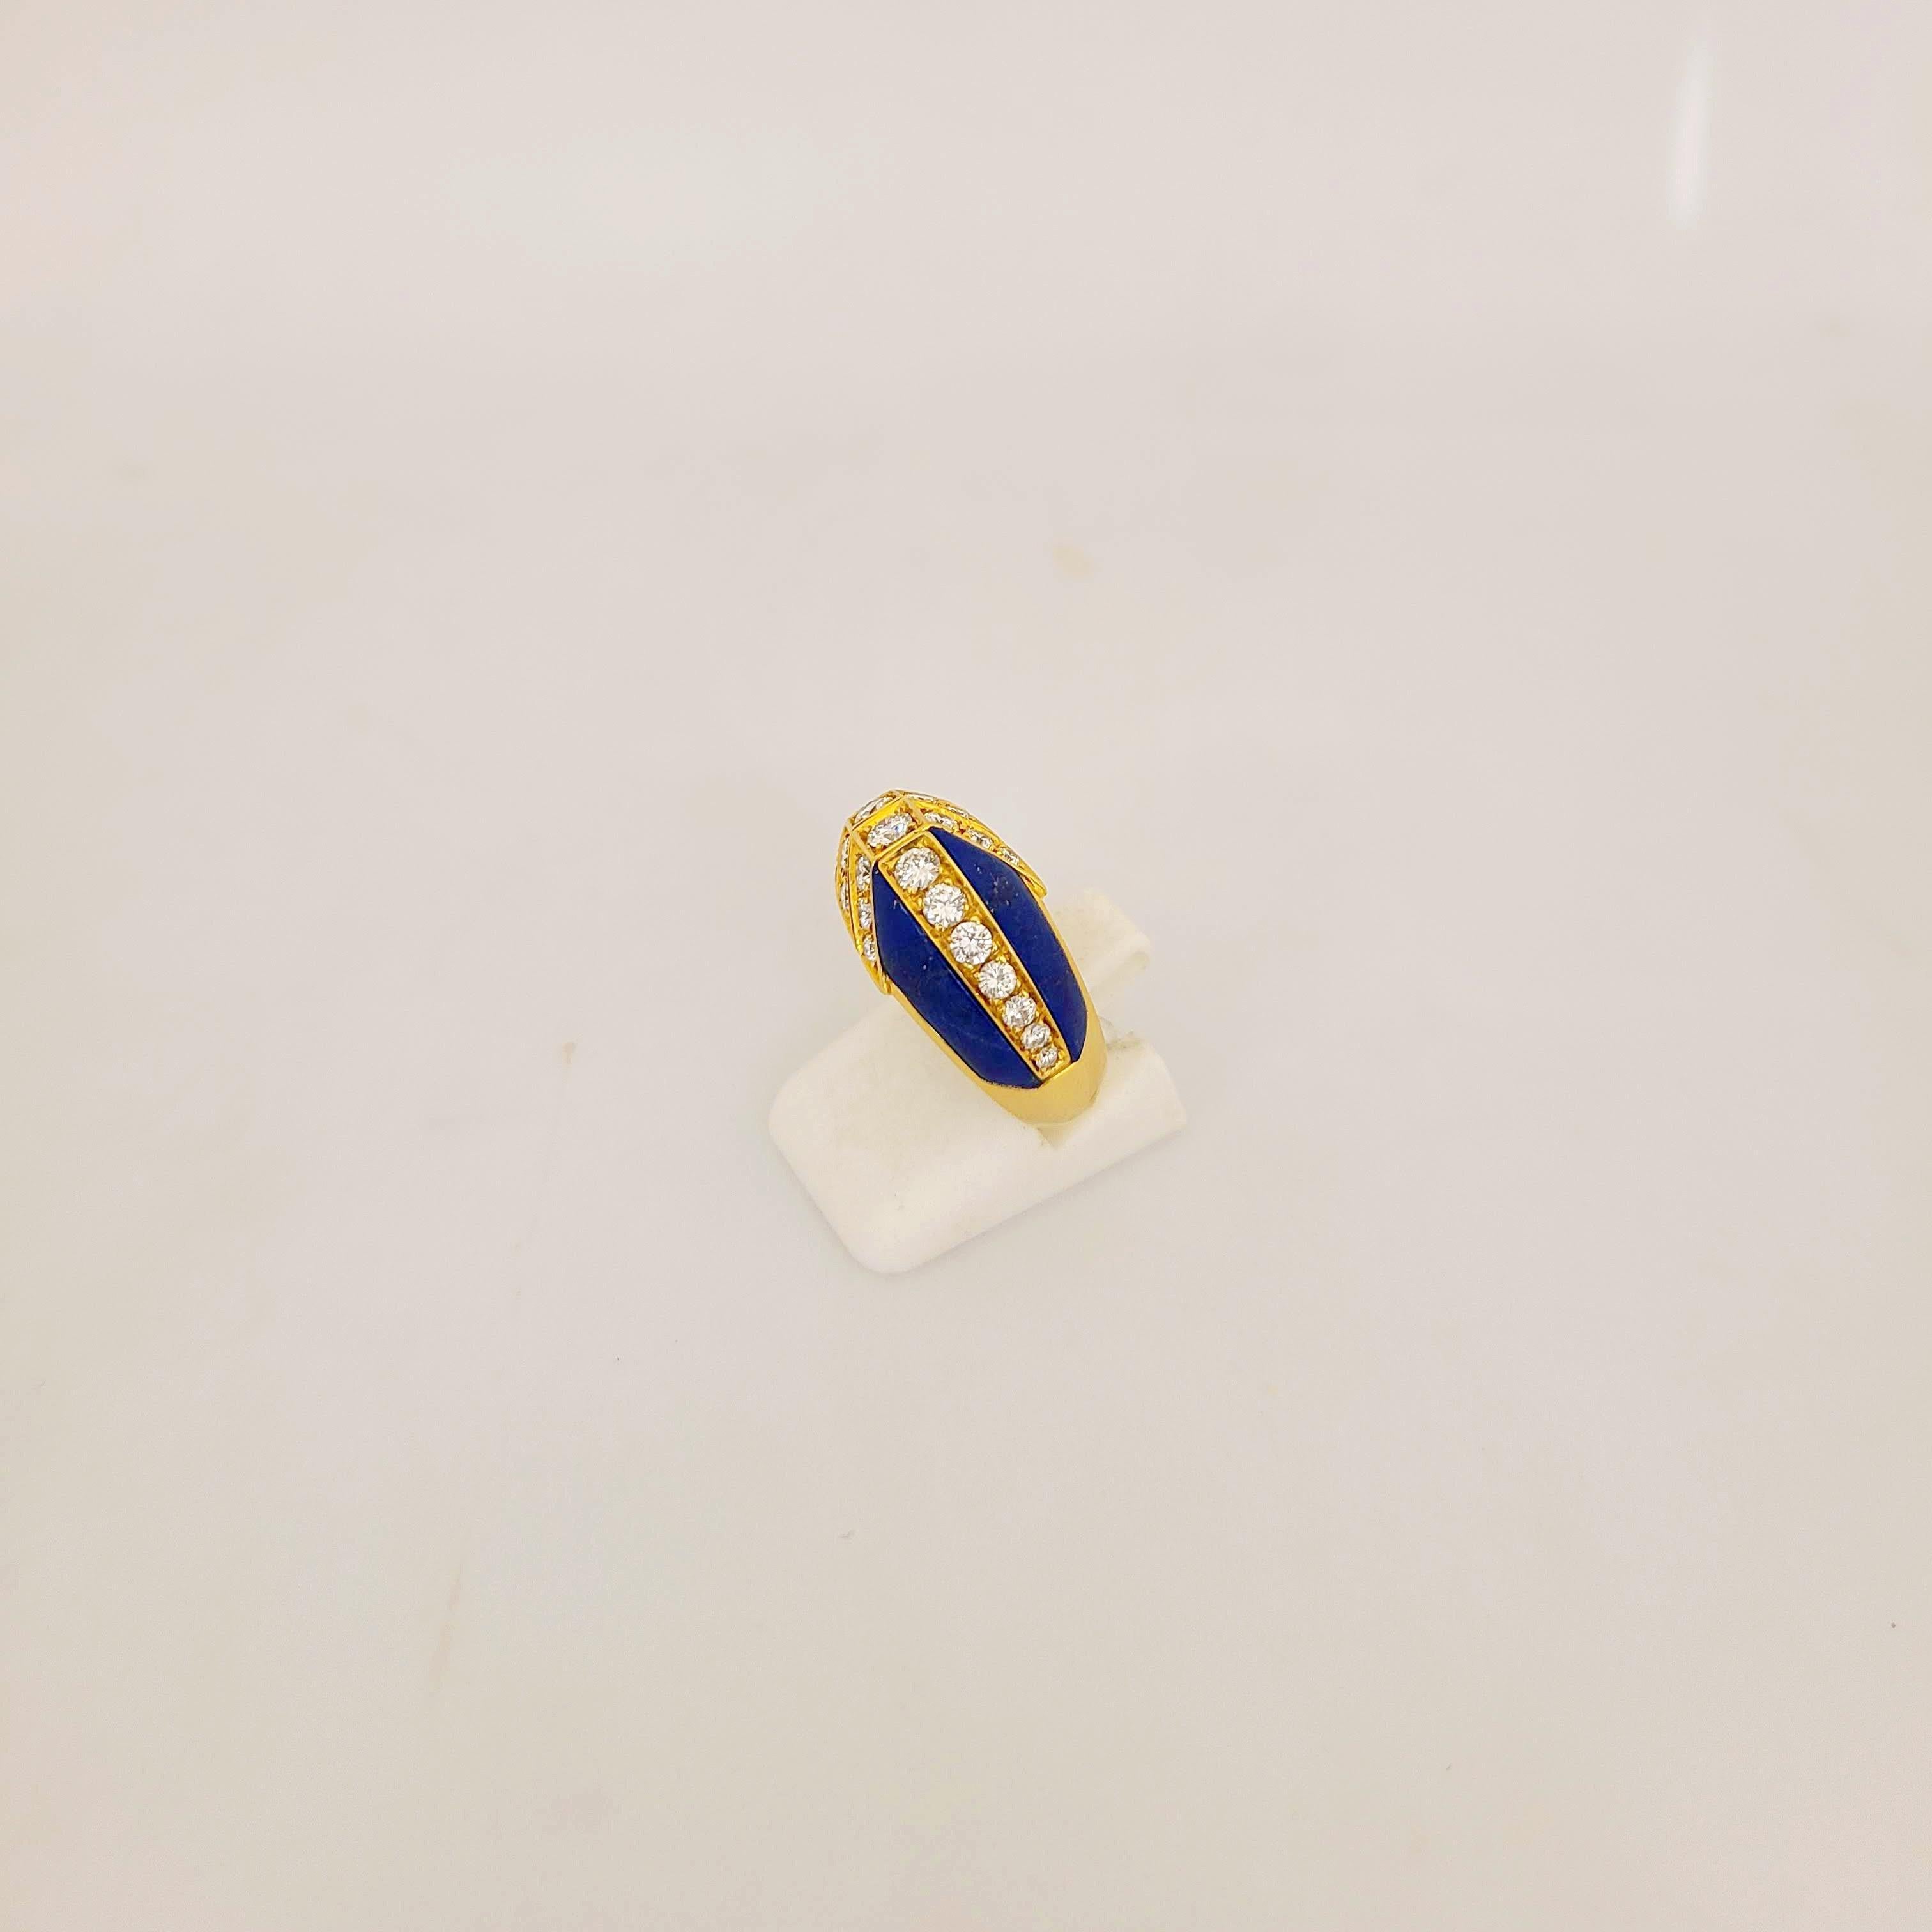 Designed by master craftsman Giuseppe Picchiotti . Cellini NYC presents this 18 karat yellow gold ring beautifully set with round brilliant diamonds, accented with lapis lazuli sections.
Total diamond weight 0.91 carats
Ring size 6.5  sizing options